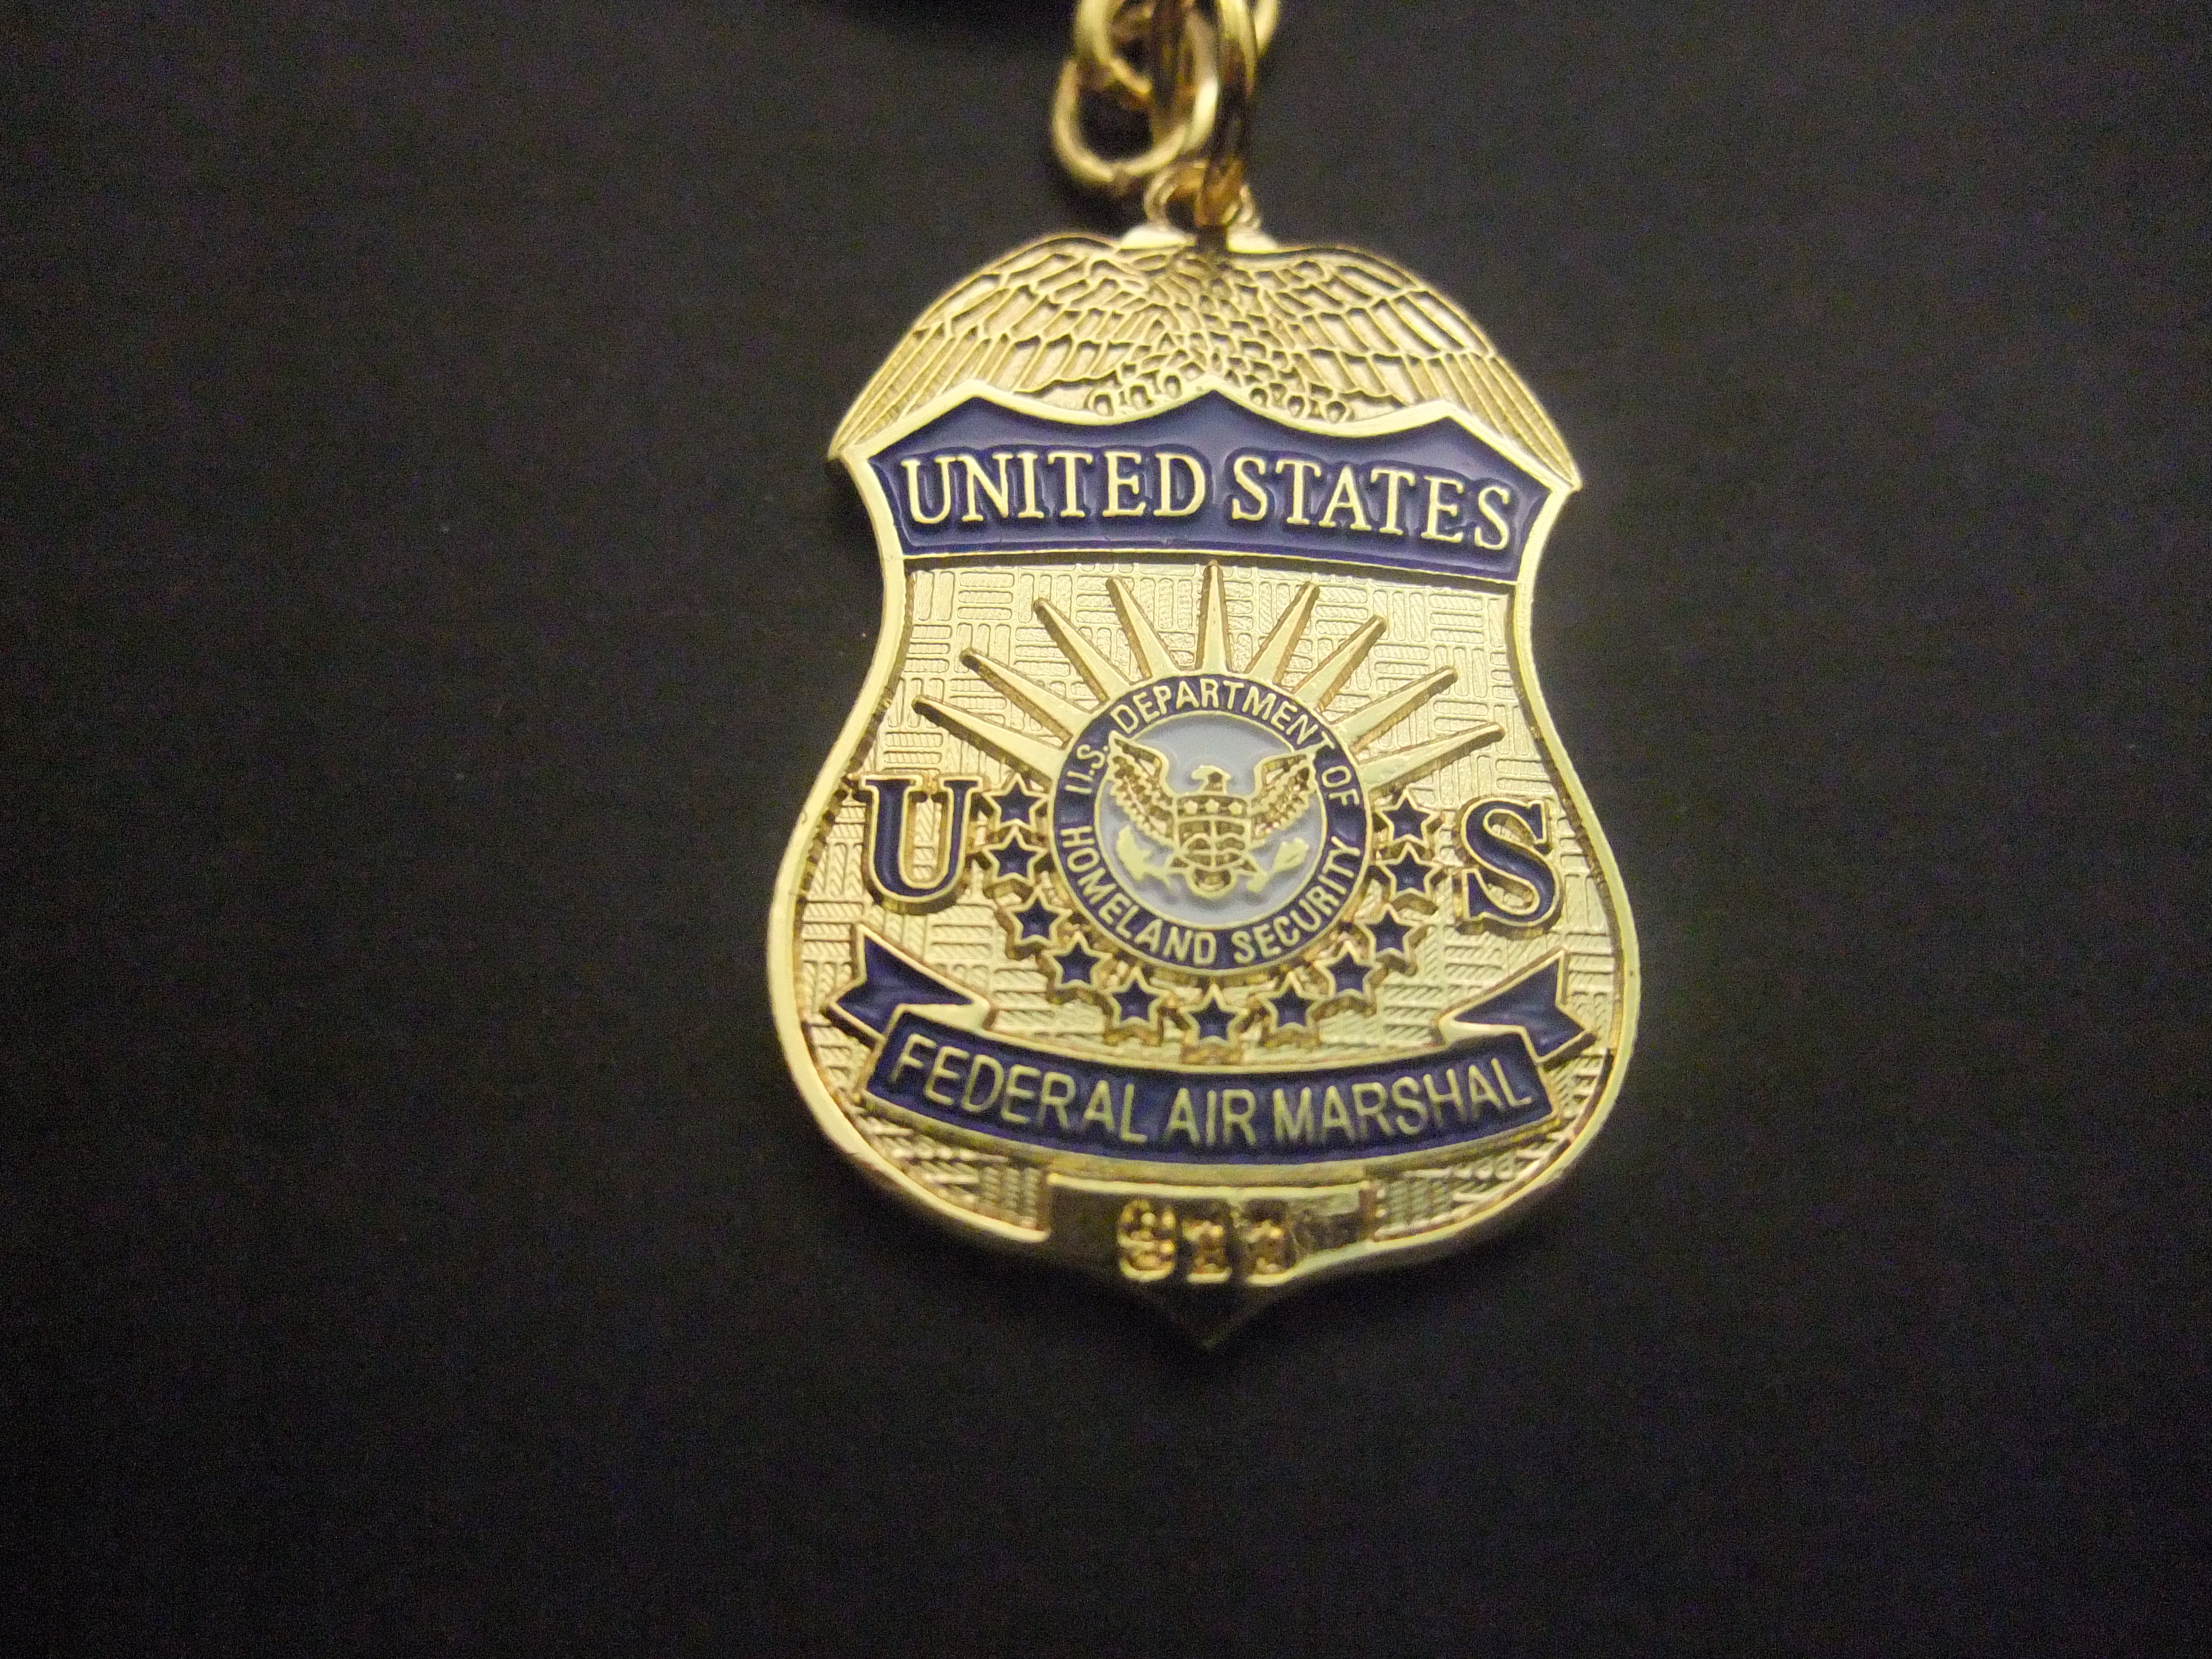 United States homeland security Federal Air Marshal